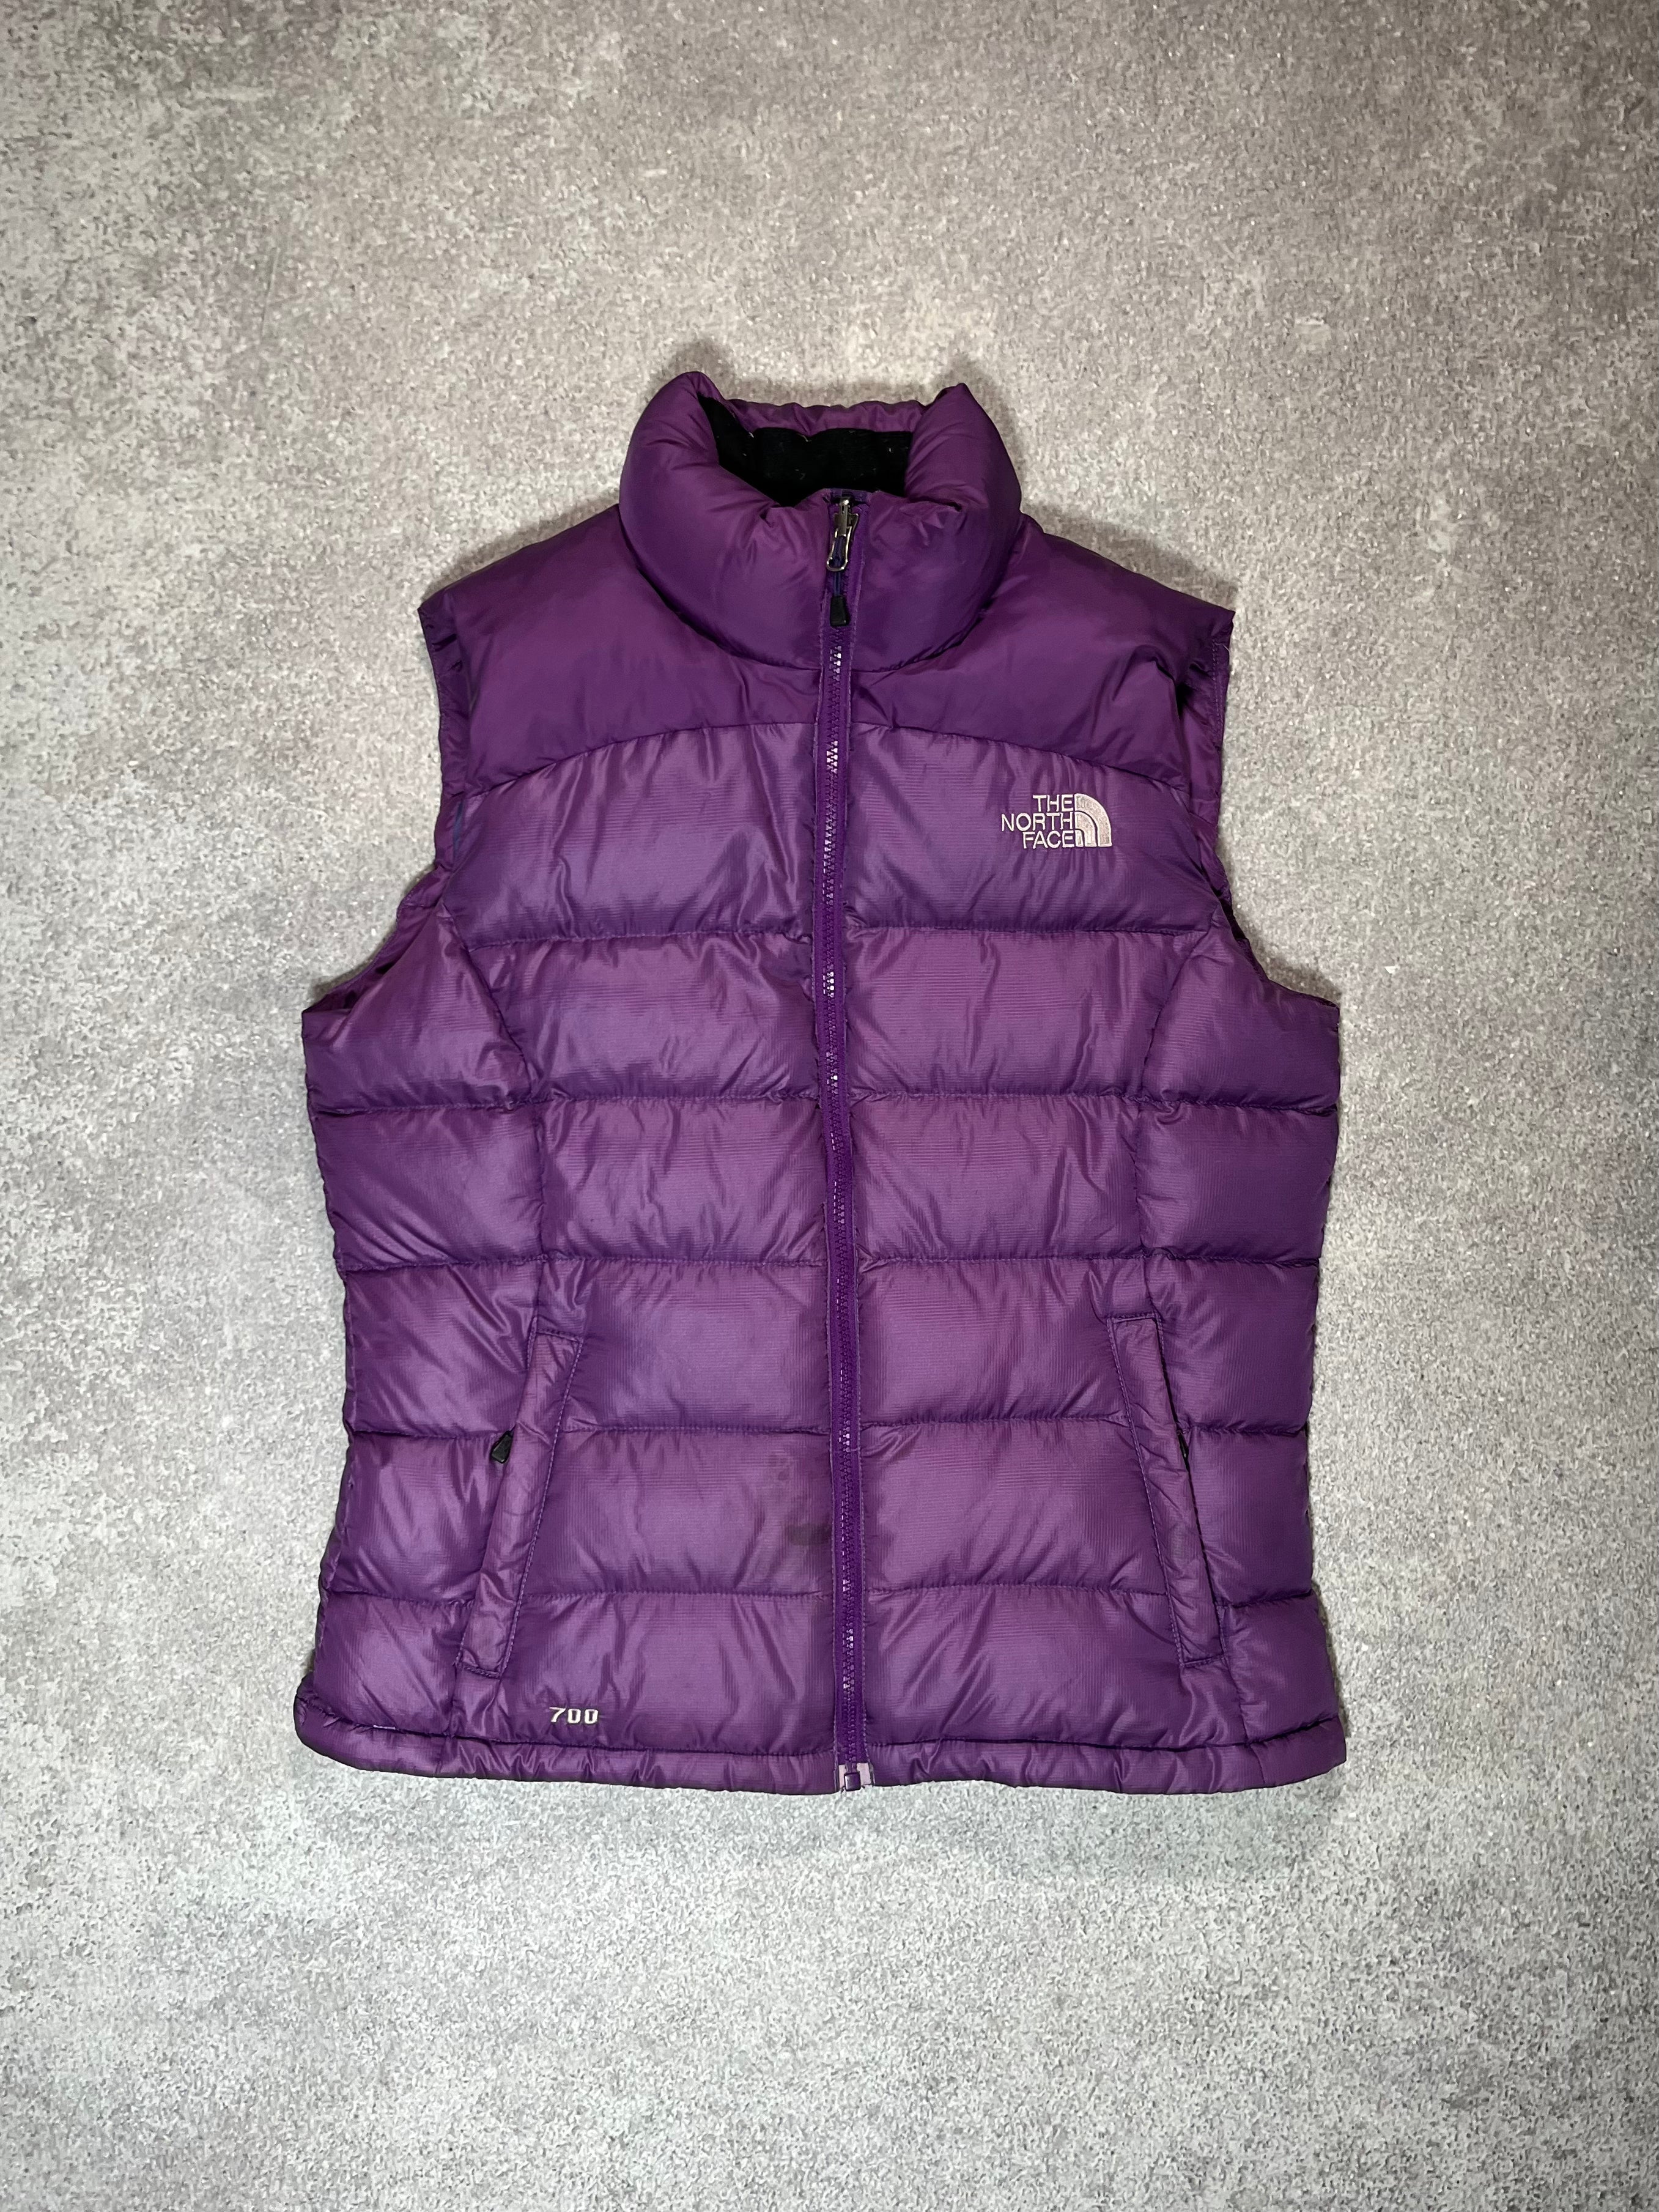 The North Face 700 Puffer Vest Purple // Small - RHAGHOUSE VINTAGE